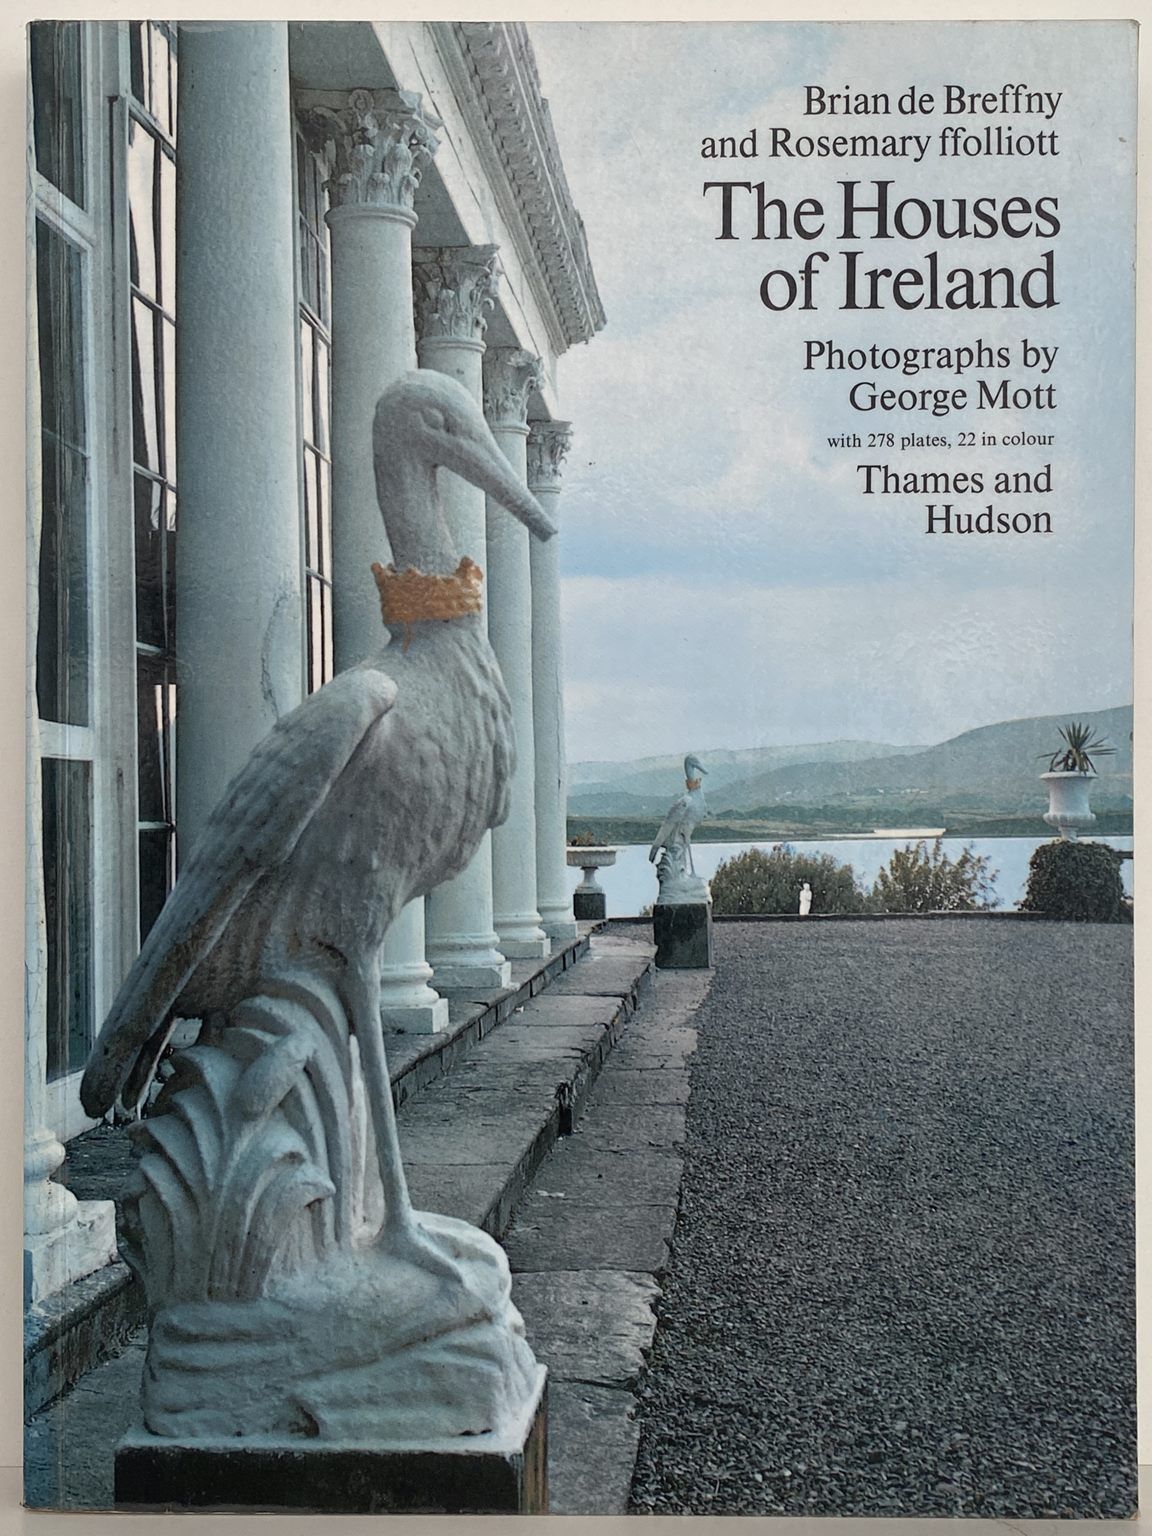 THE HOUSES OF IRELAND: From the Medieval Castle to the Edwardian Villa